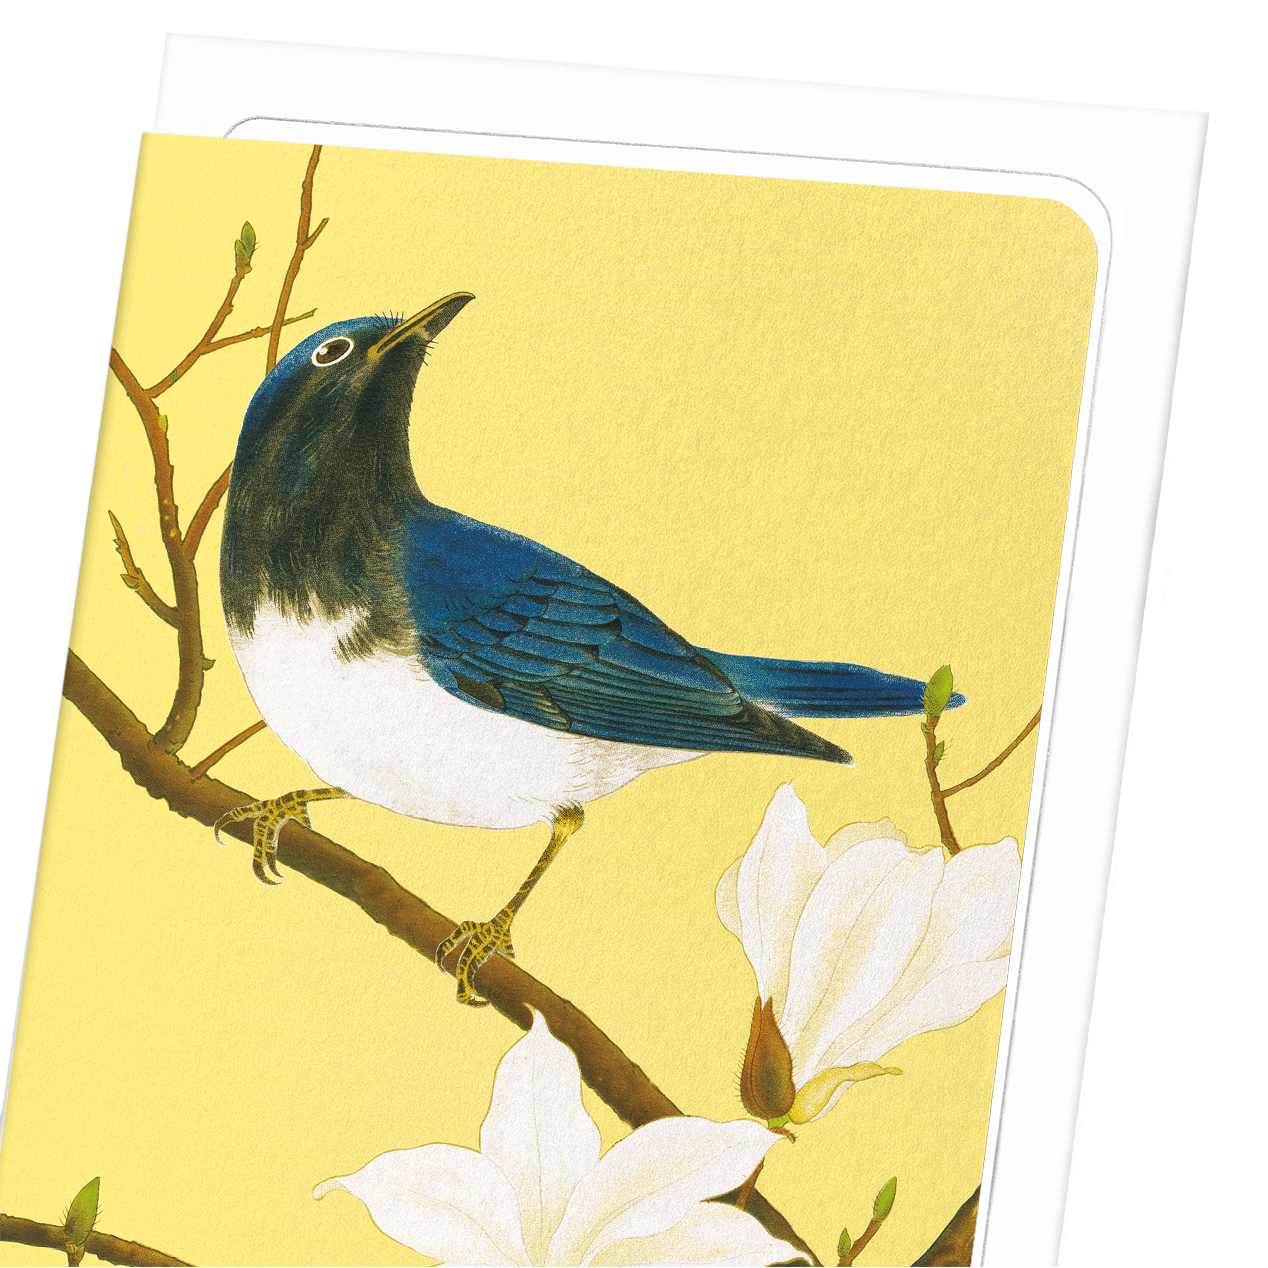 BLUE-AND-WHITE FLYCATCHER AND MAGNOLIA TREE (C.1930)